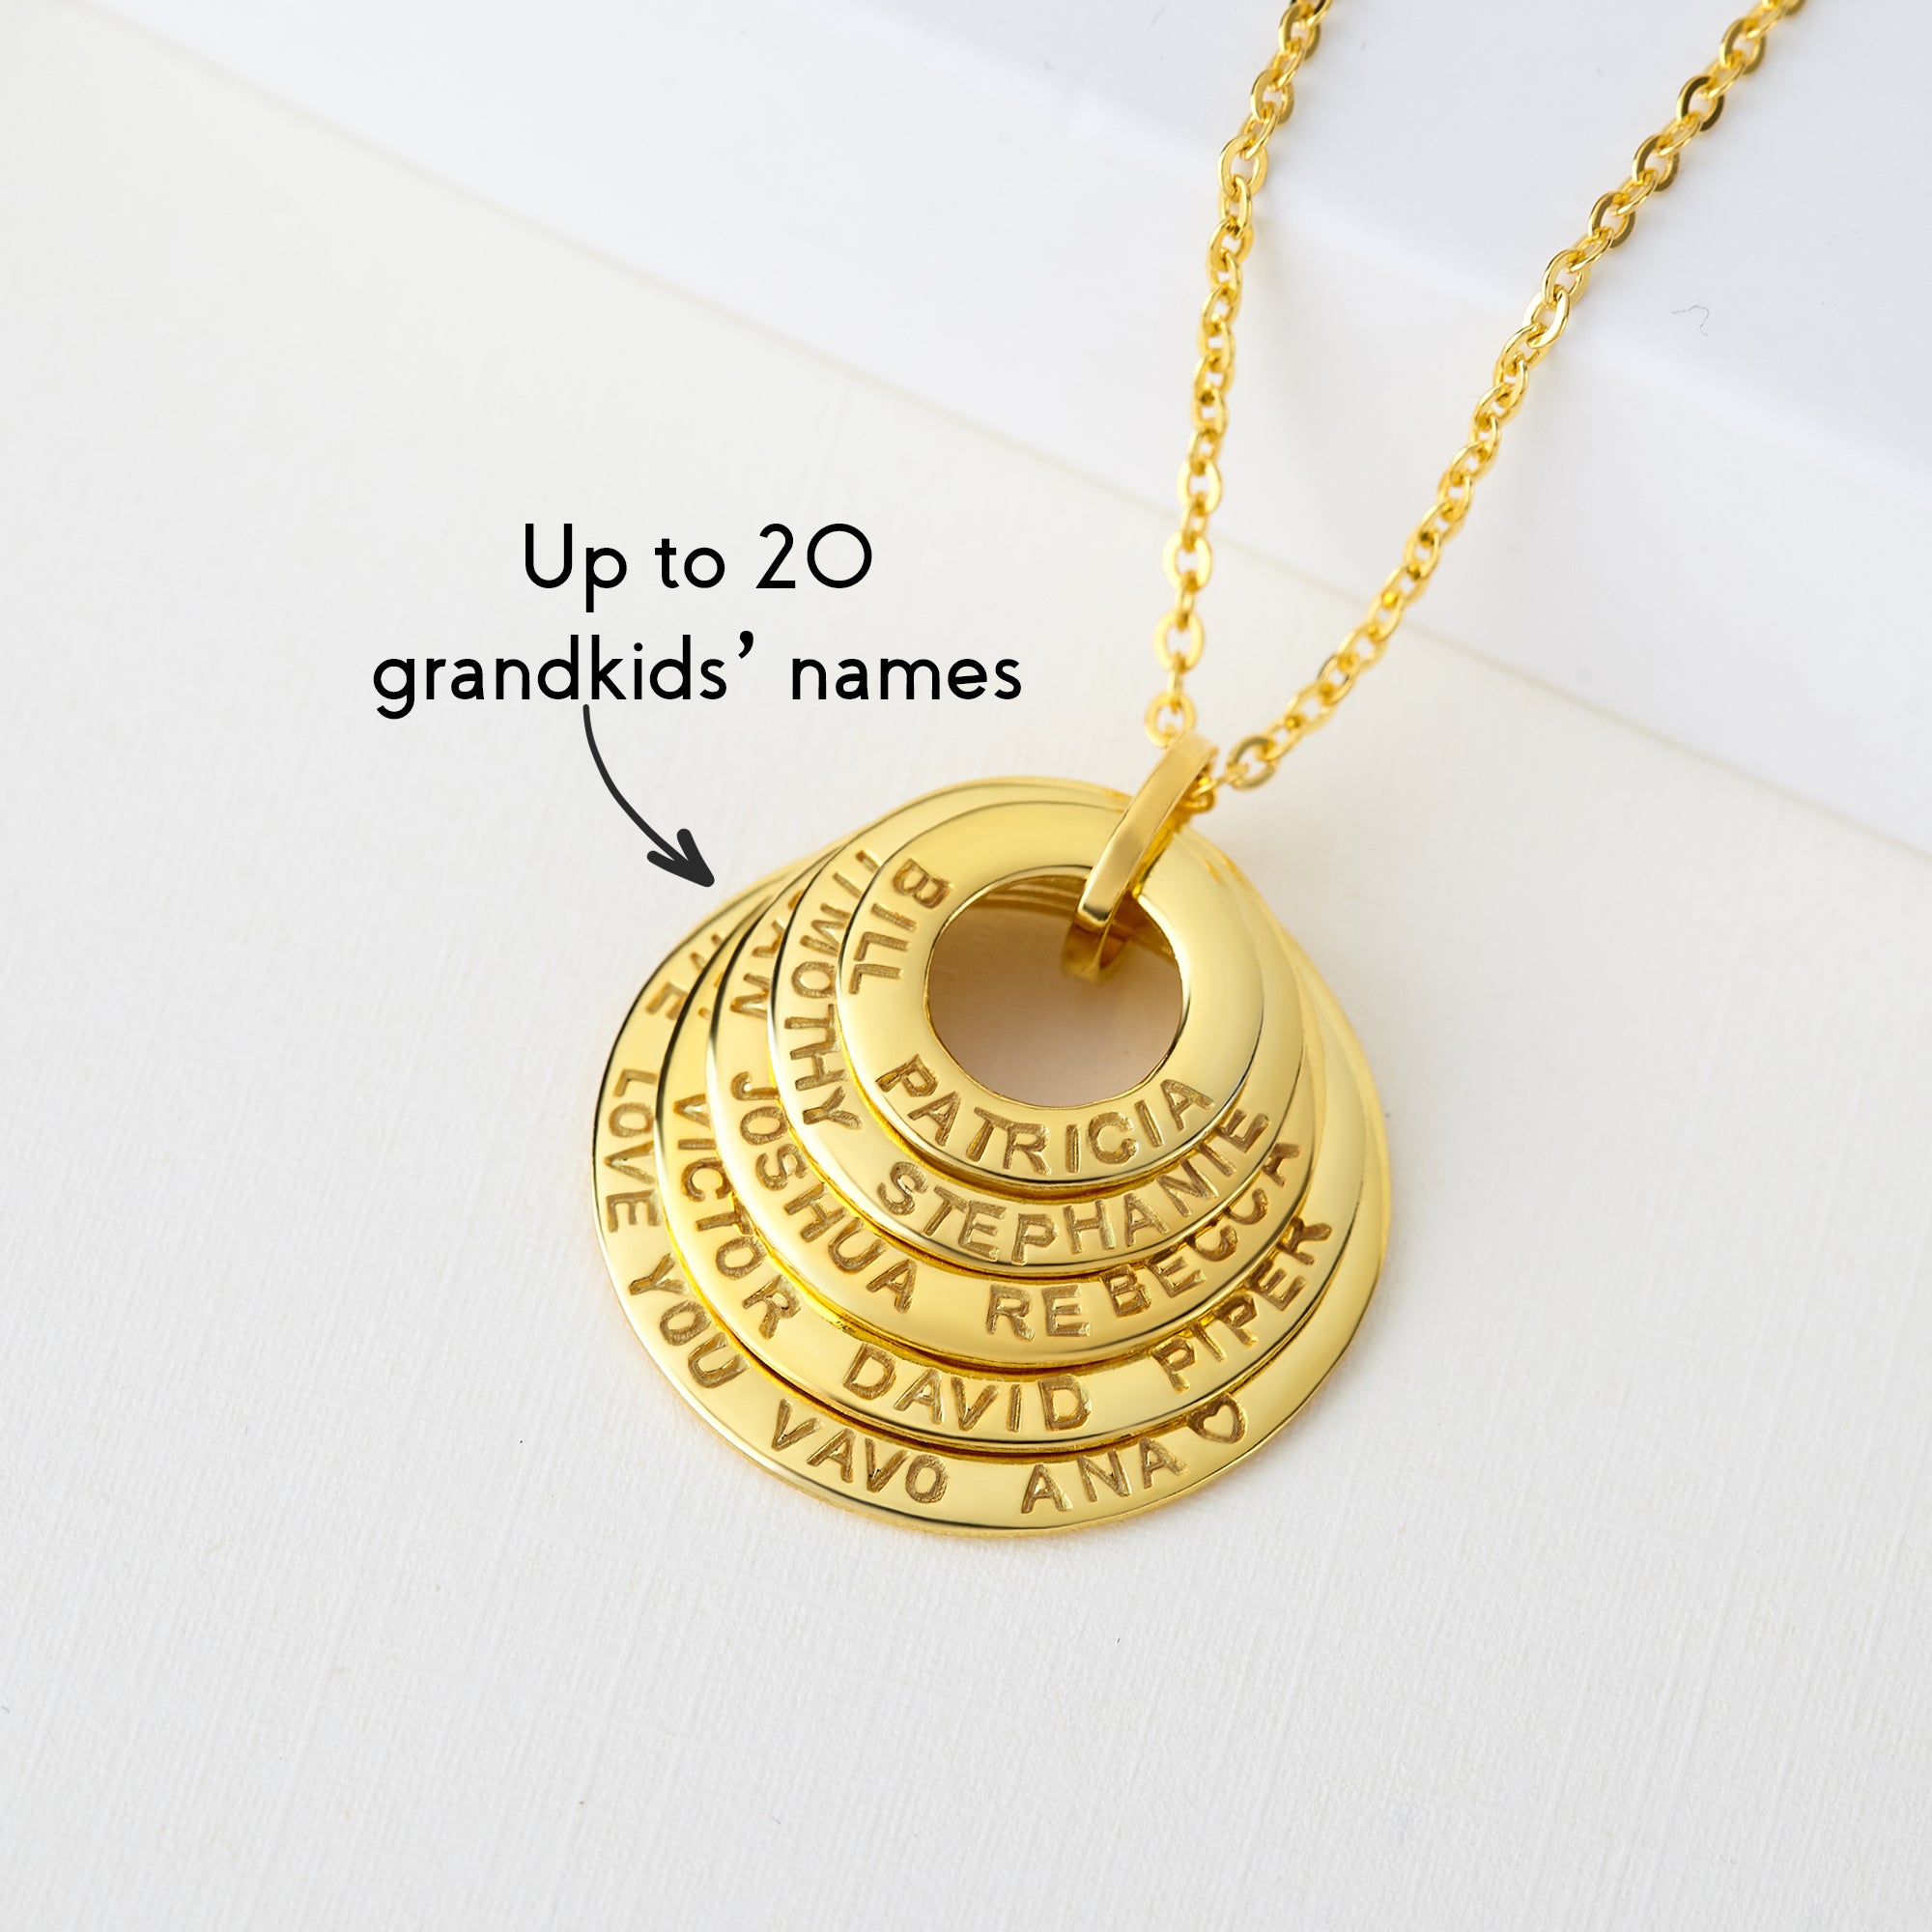 Personalized Grandchildren Necklace with Names - Sterling Silver and Gold-Plated Options for Grandma Gifts - Necklaces - Bijou Her -  -  - 